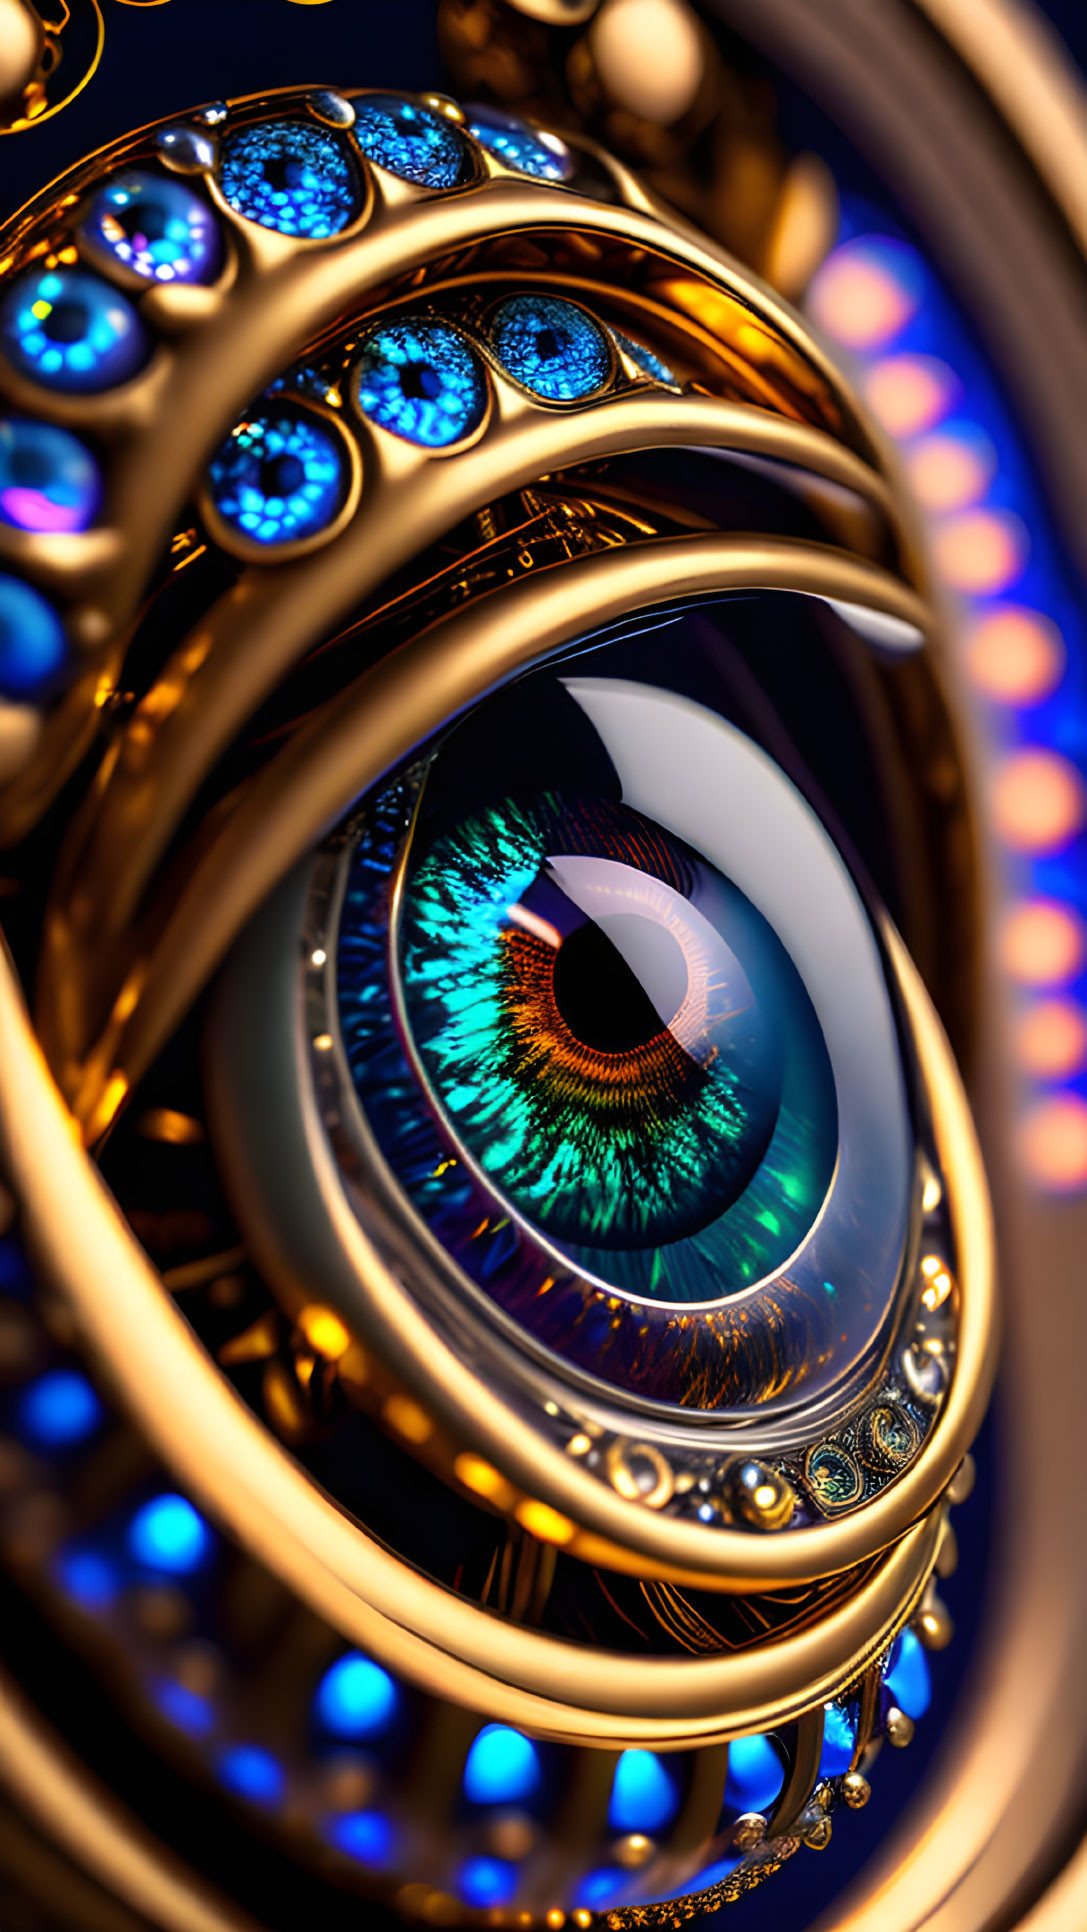 Detailed mechanical eye with gold ornamentation and blue gems on dark background